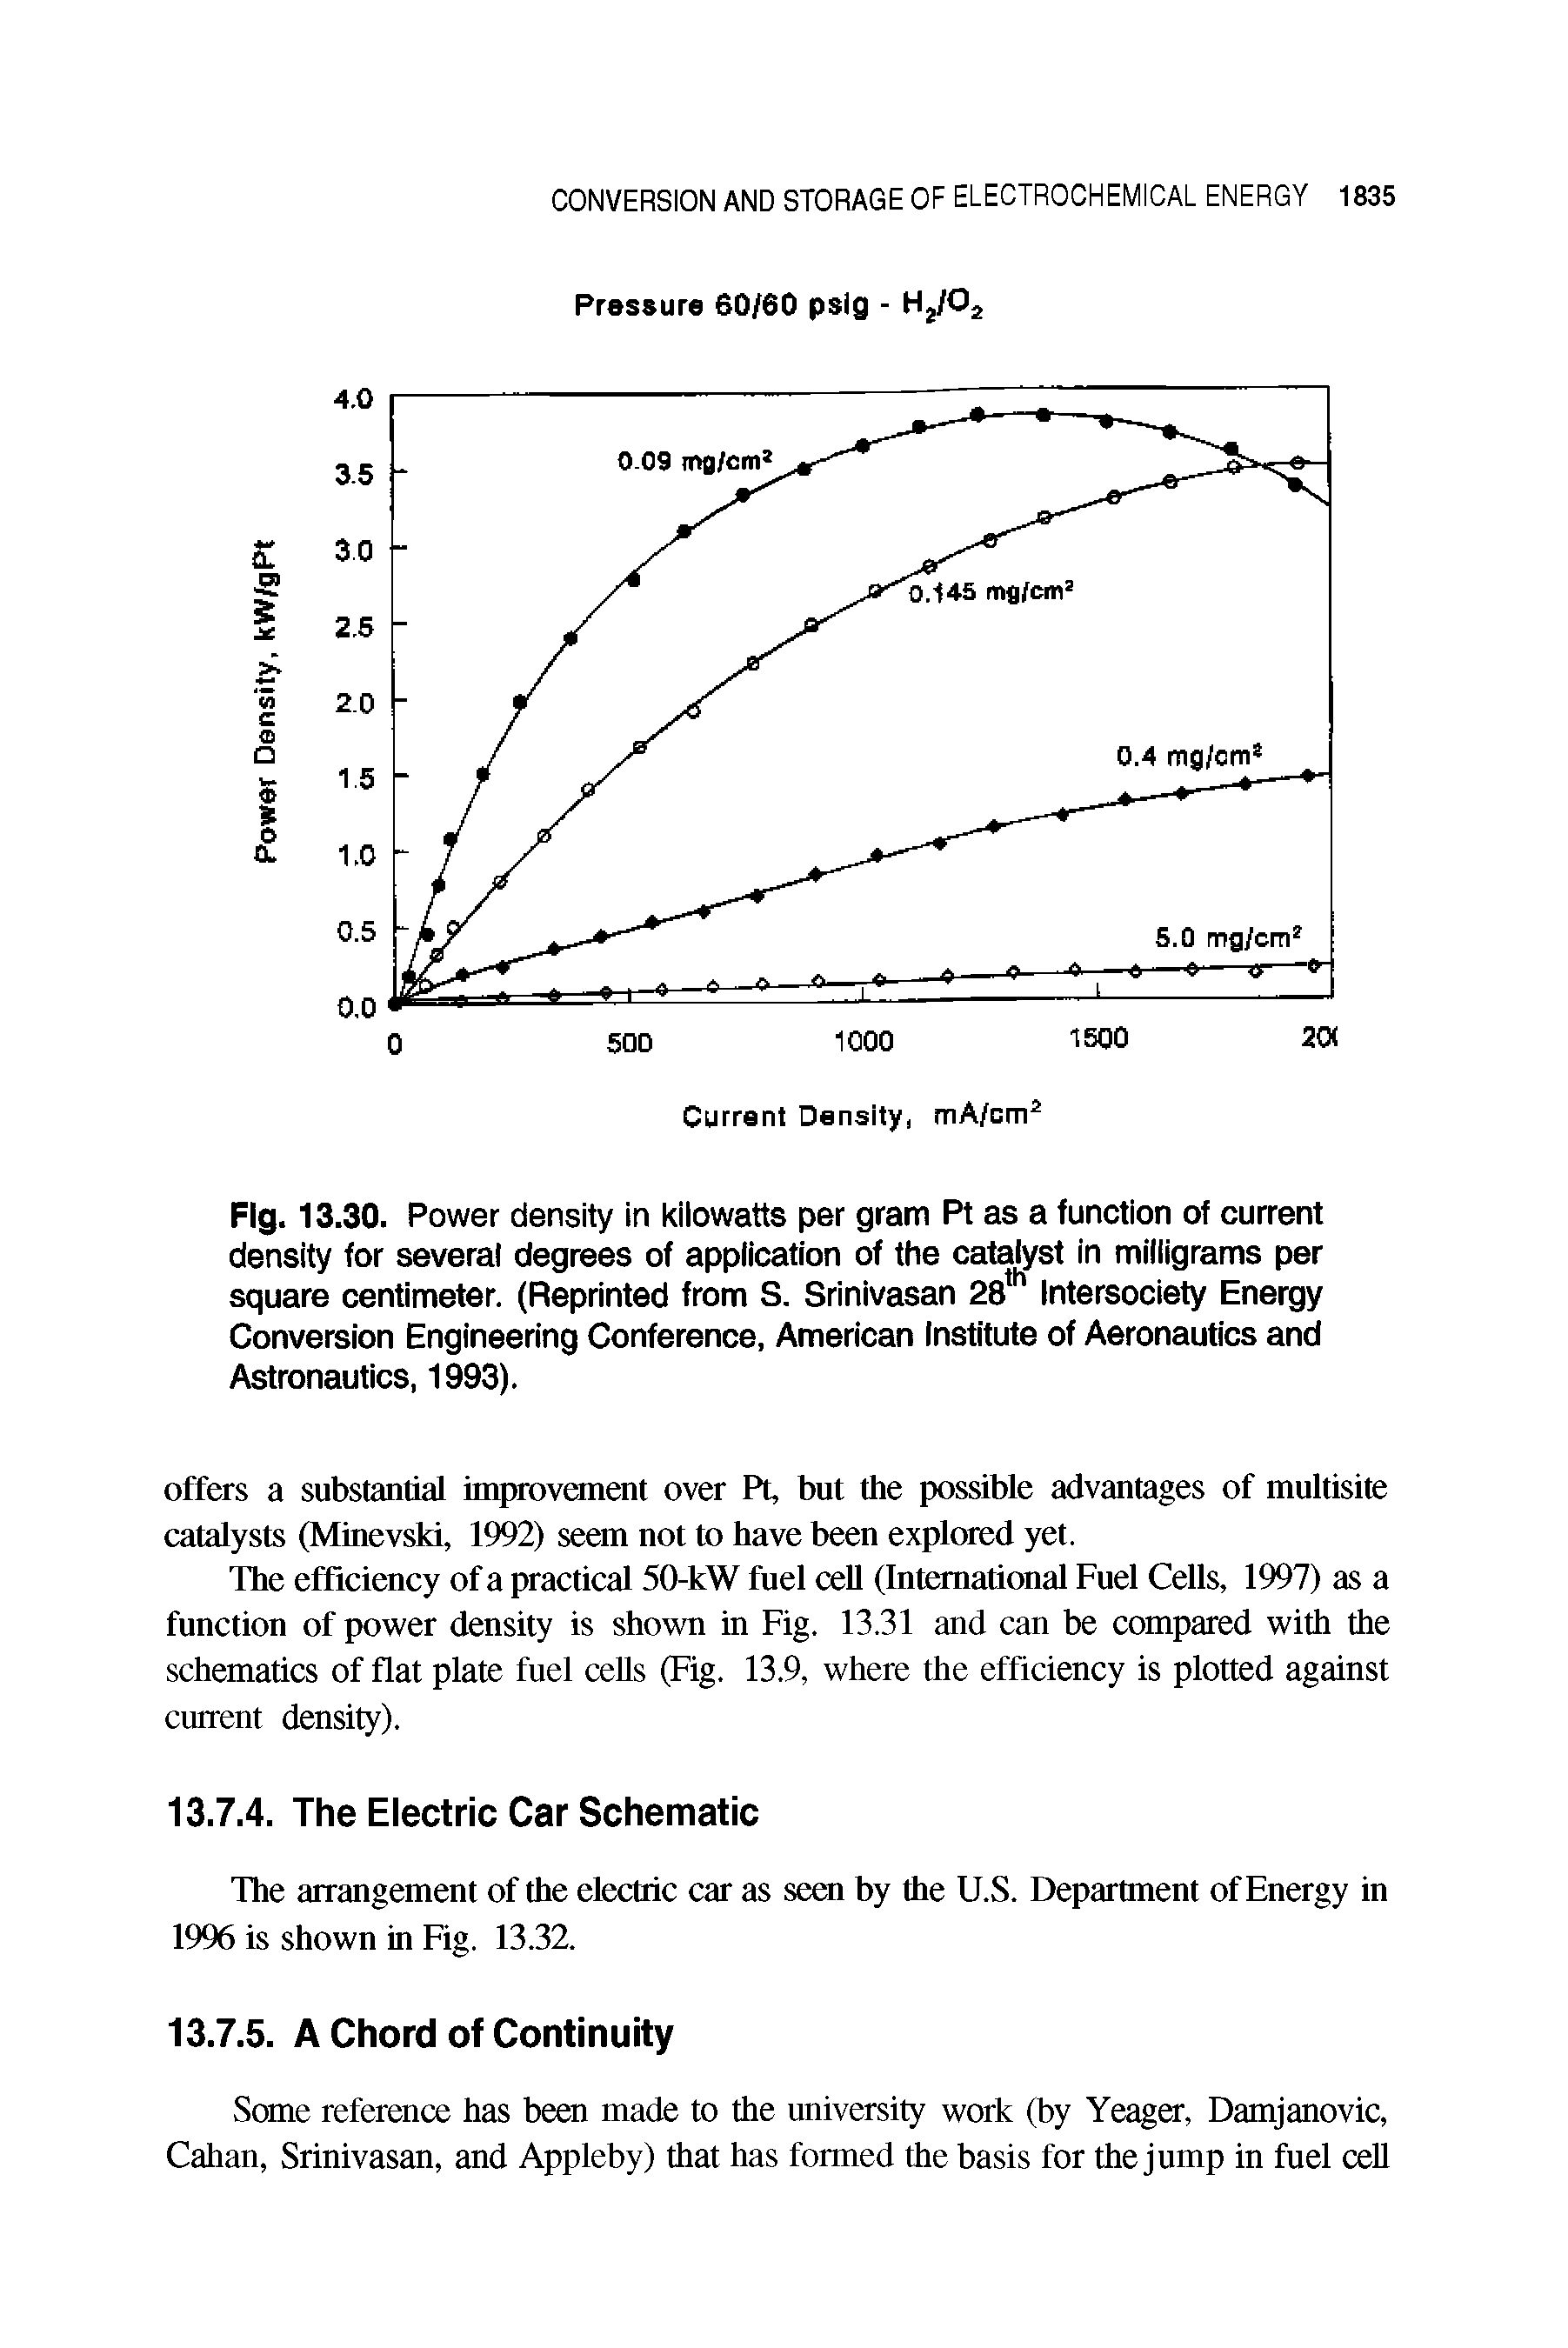 Fig. 13.30. Power density in kilowatts per gram Pt as a function of current density for several degrees of application of the catalyst in milligrams per square centimeter. (Reprinted from S. Srinivasan 28th Intersociety Energy Conversion Engineering Conference, American Institute of Aeronautics and Astronautics, 1993).